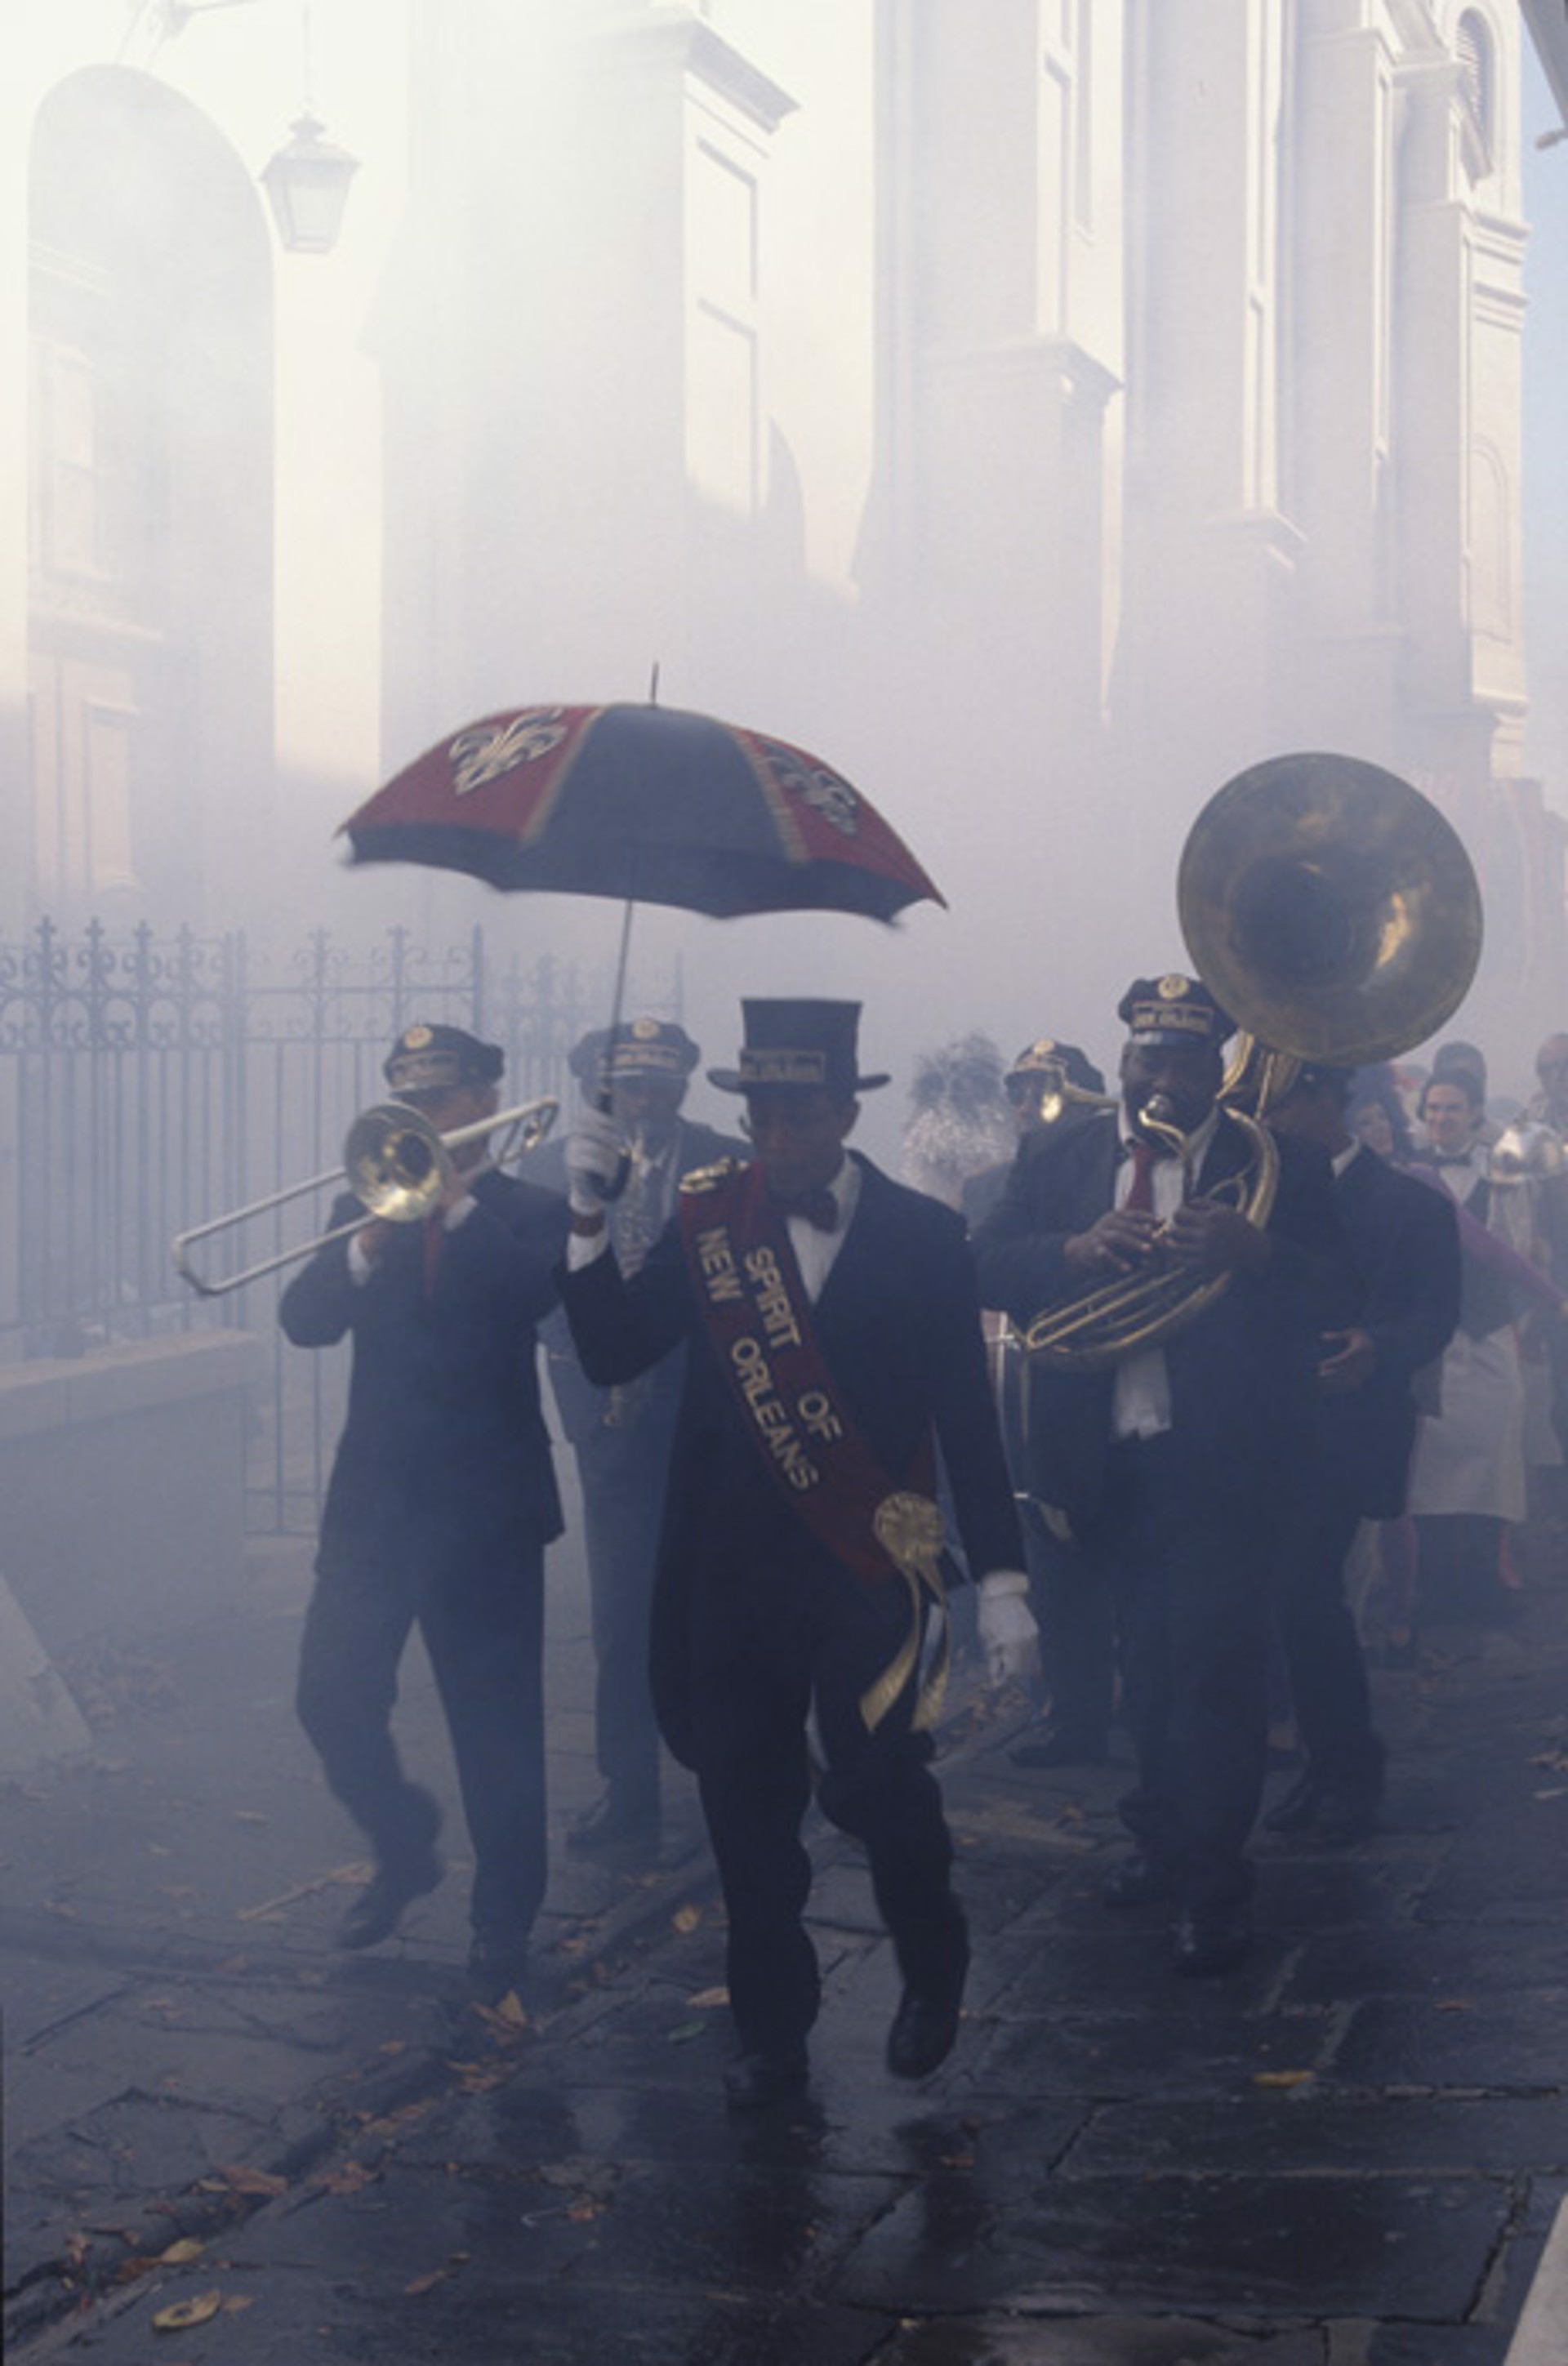 Spirit of New Orleans by Philip Gould